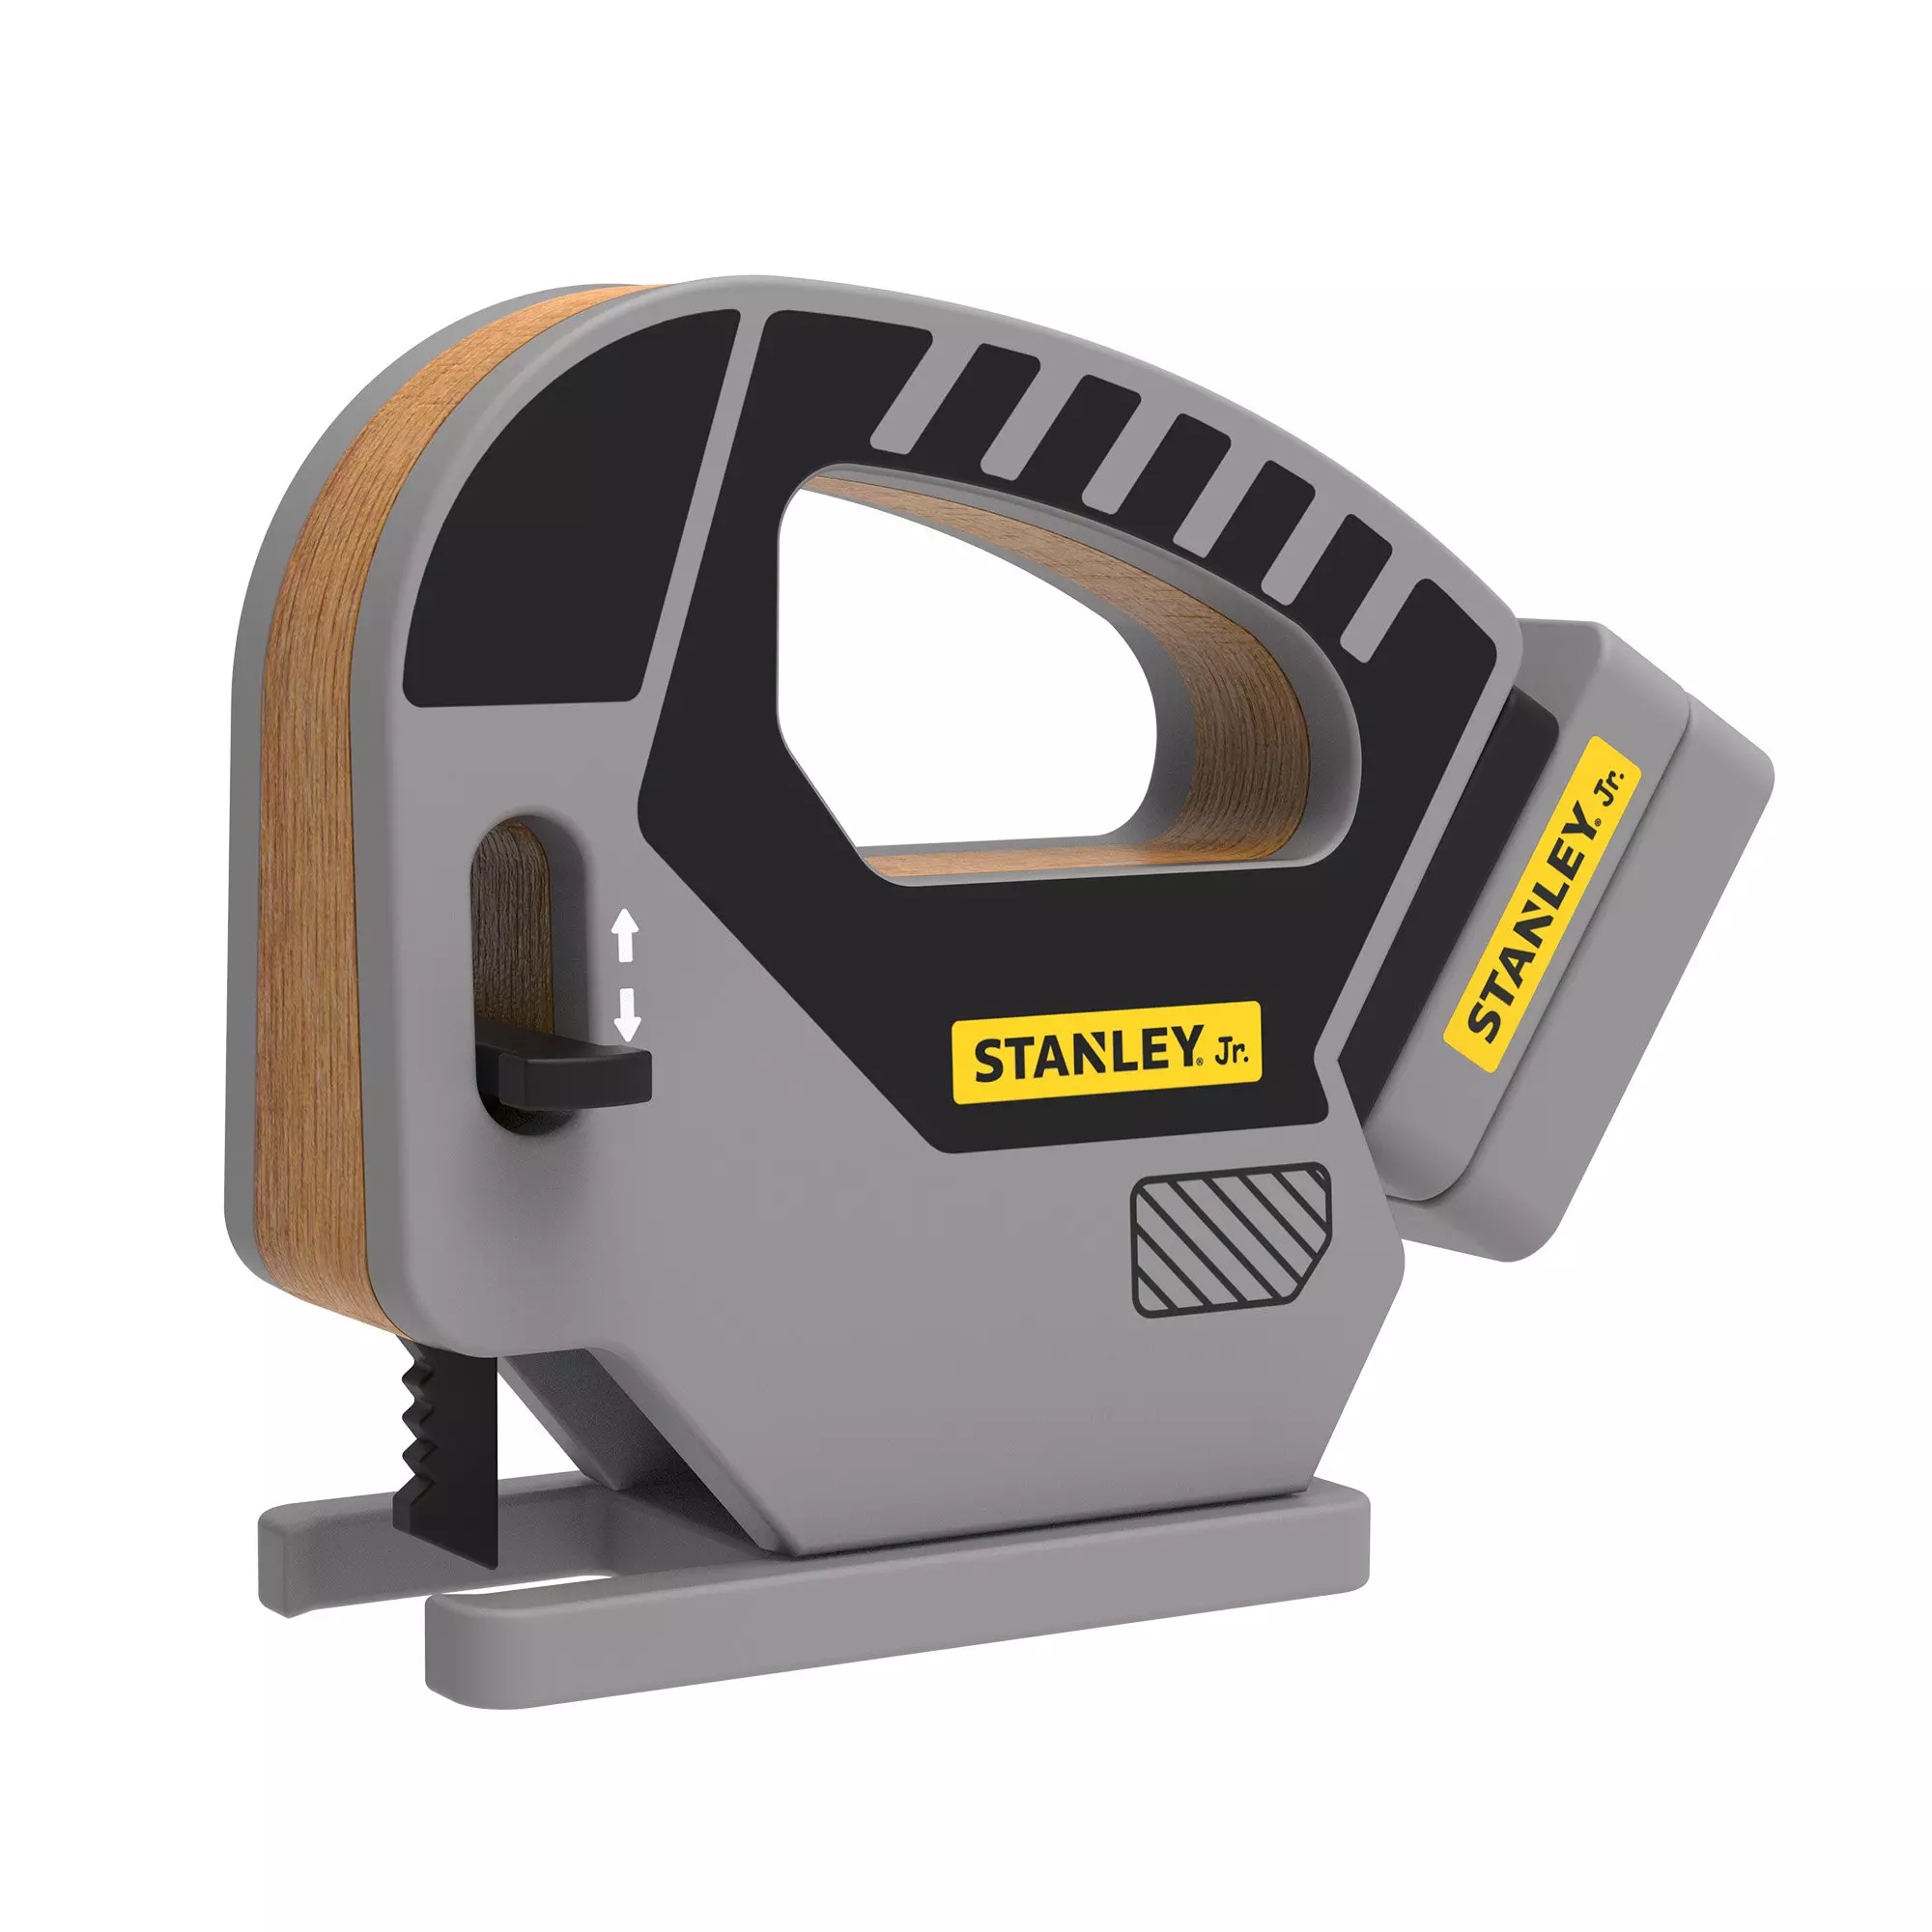 Stanley Jr. Wooden Jigsaw Wrp003-Sy